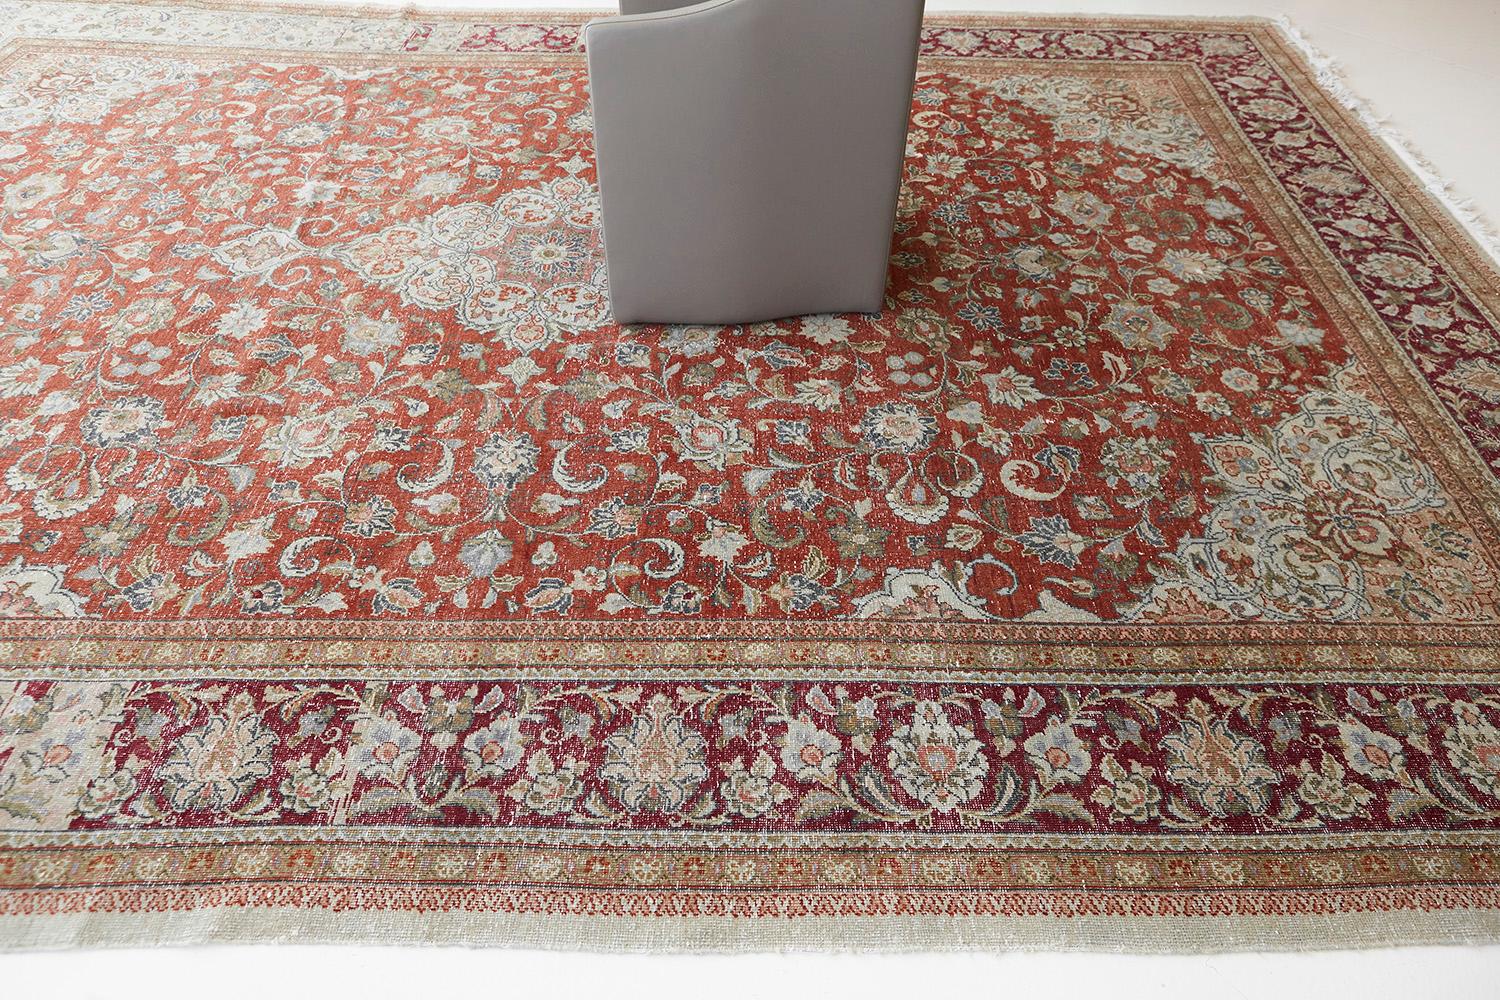 Featuring a myriad of symbolic ancient motifs in the gorgeous warm colour scheme running along the abrashed field. This fascinating rug exhibits the celebration of dance and composition reflected by the botanical elements of this stunning Vintage